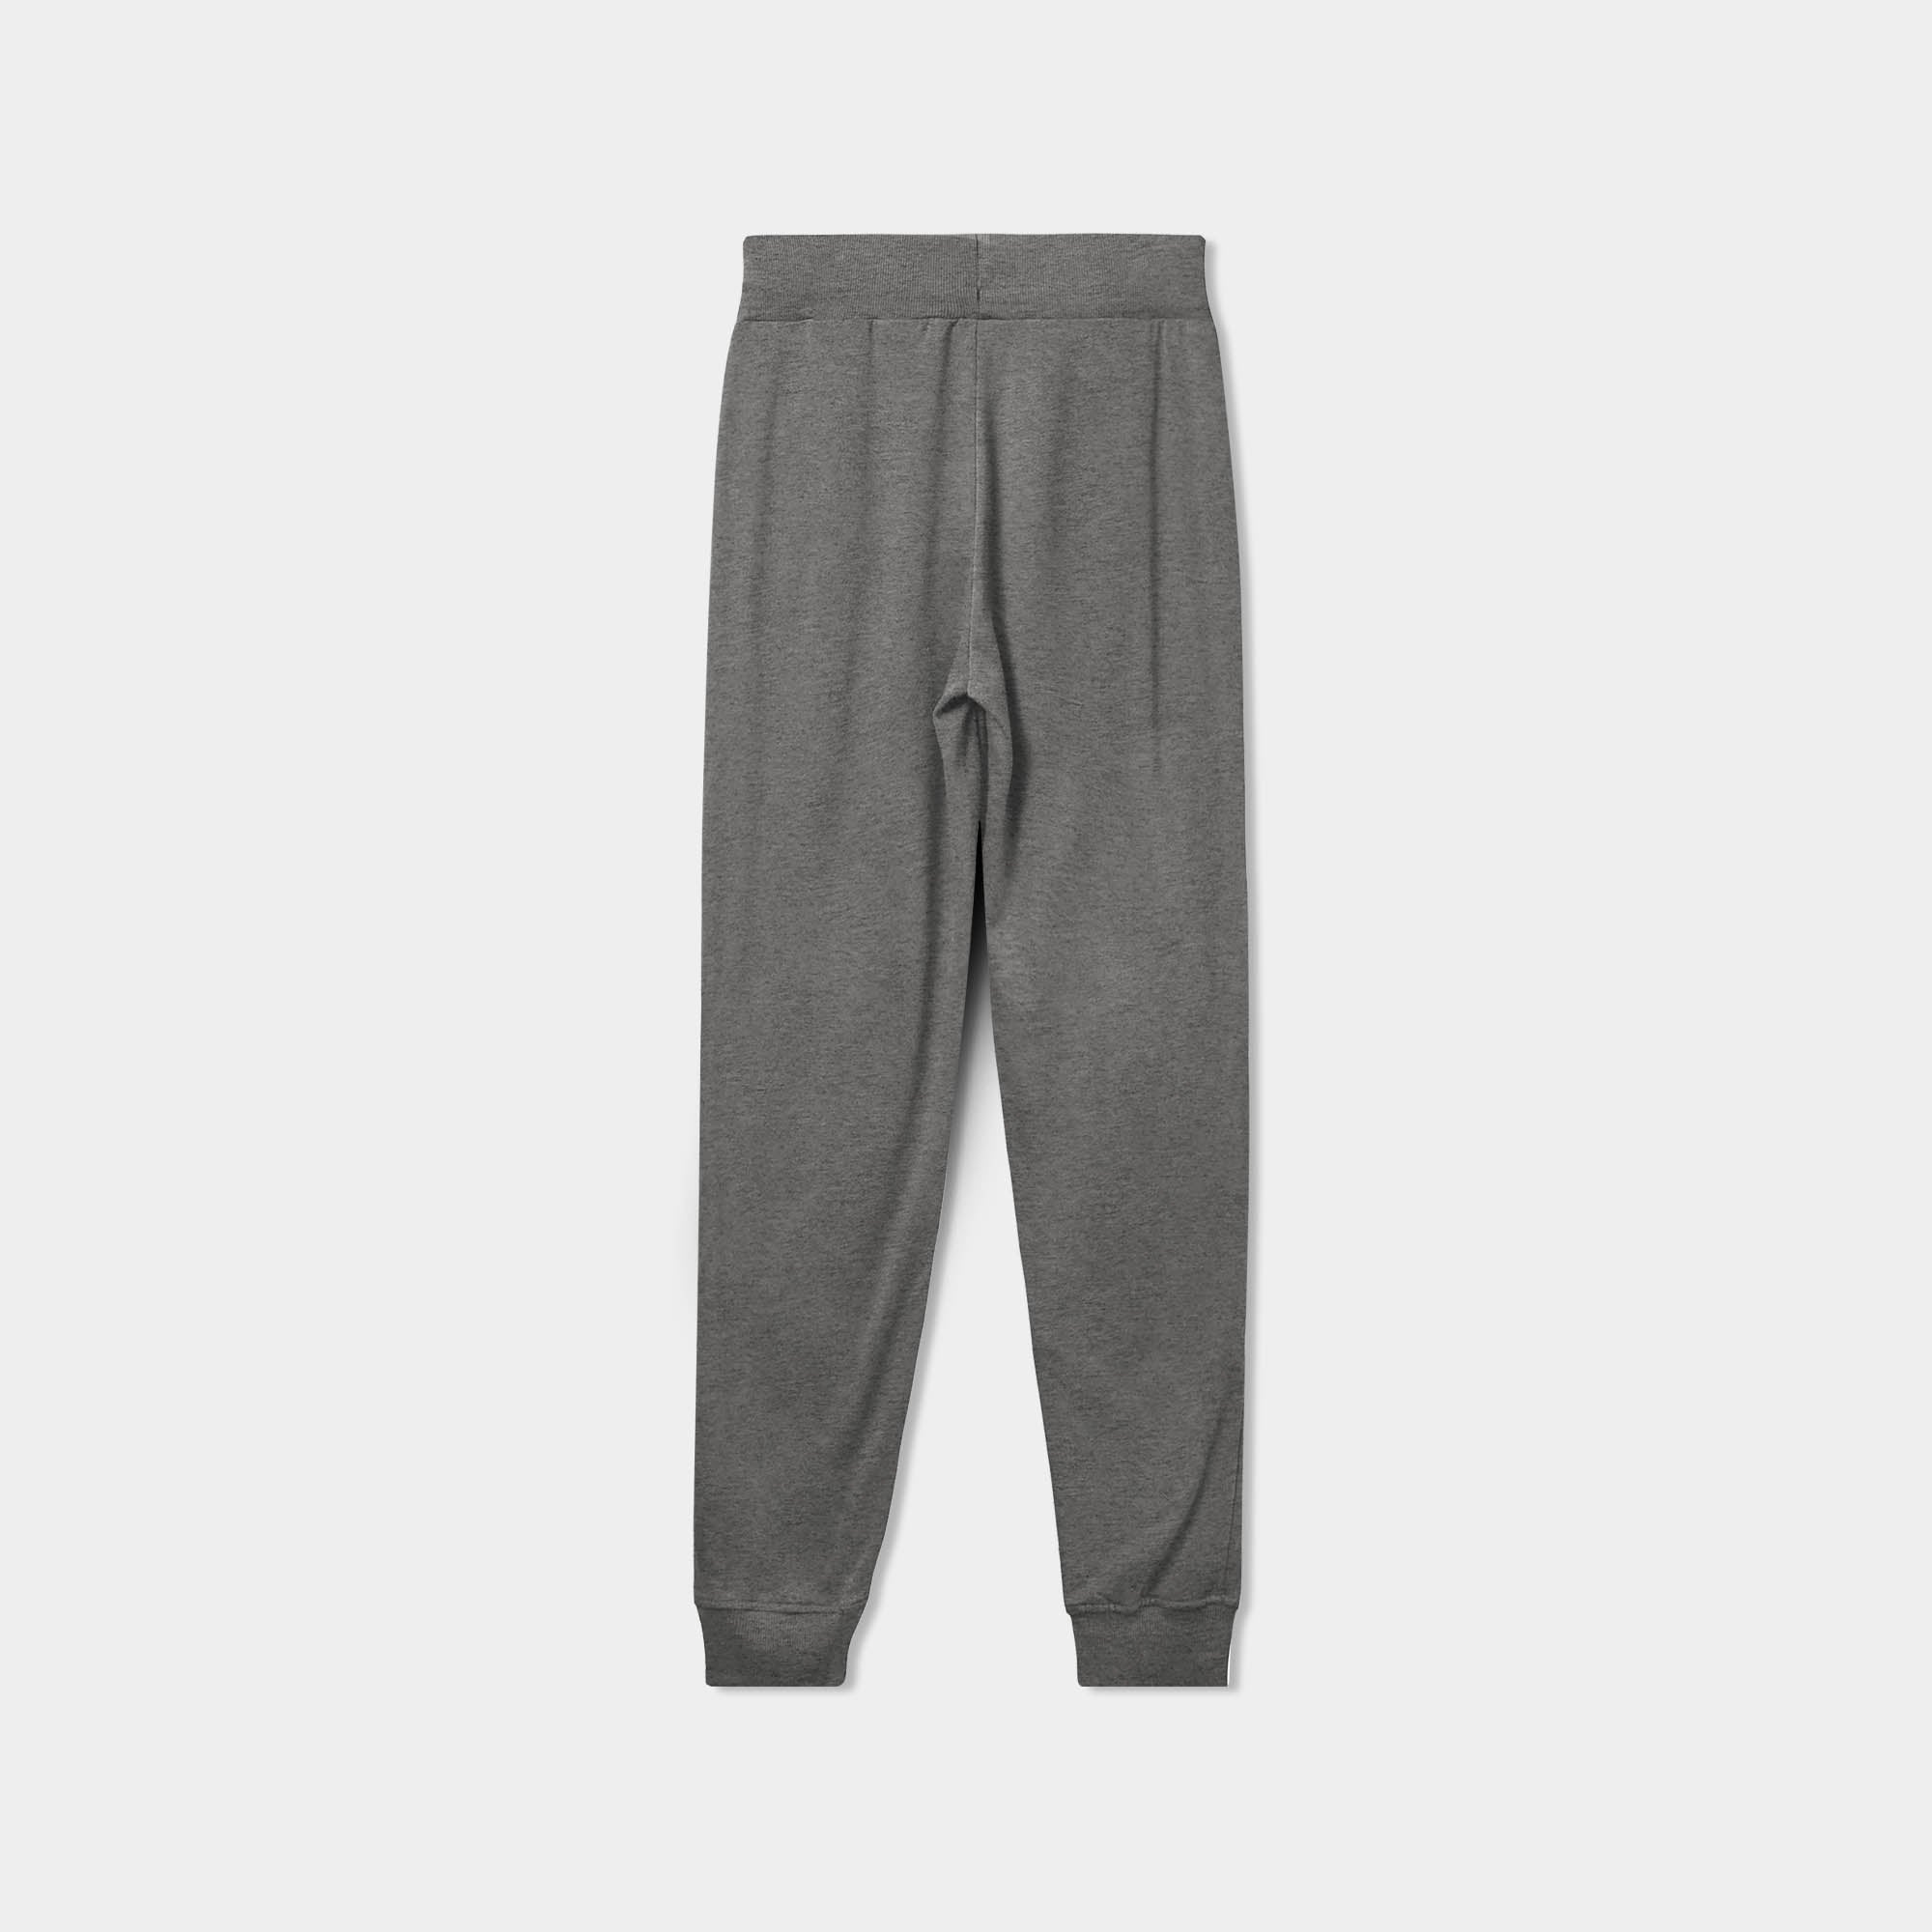 sweatpants with zipper pockets_sweatpants with zippers_men's sweatpants with zipper pockets_skinny jogger_mens skinny joggers_skinny sweatpants_boys skinny joggers_Heather Gray